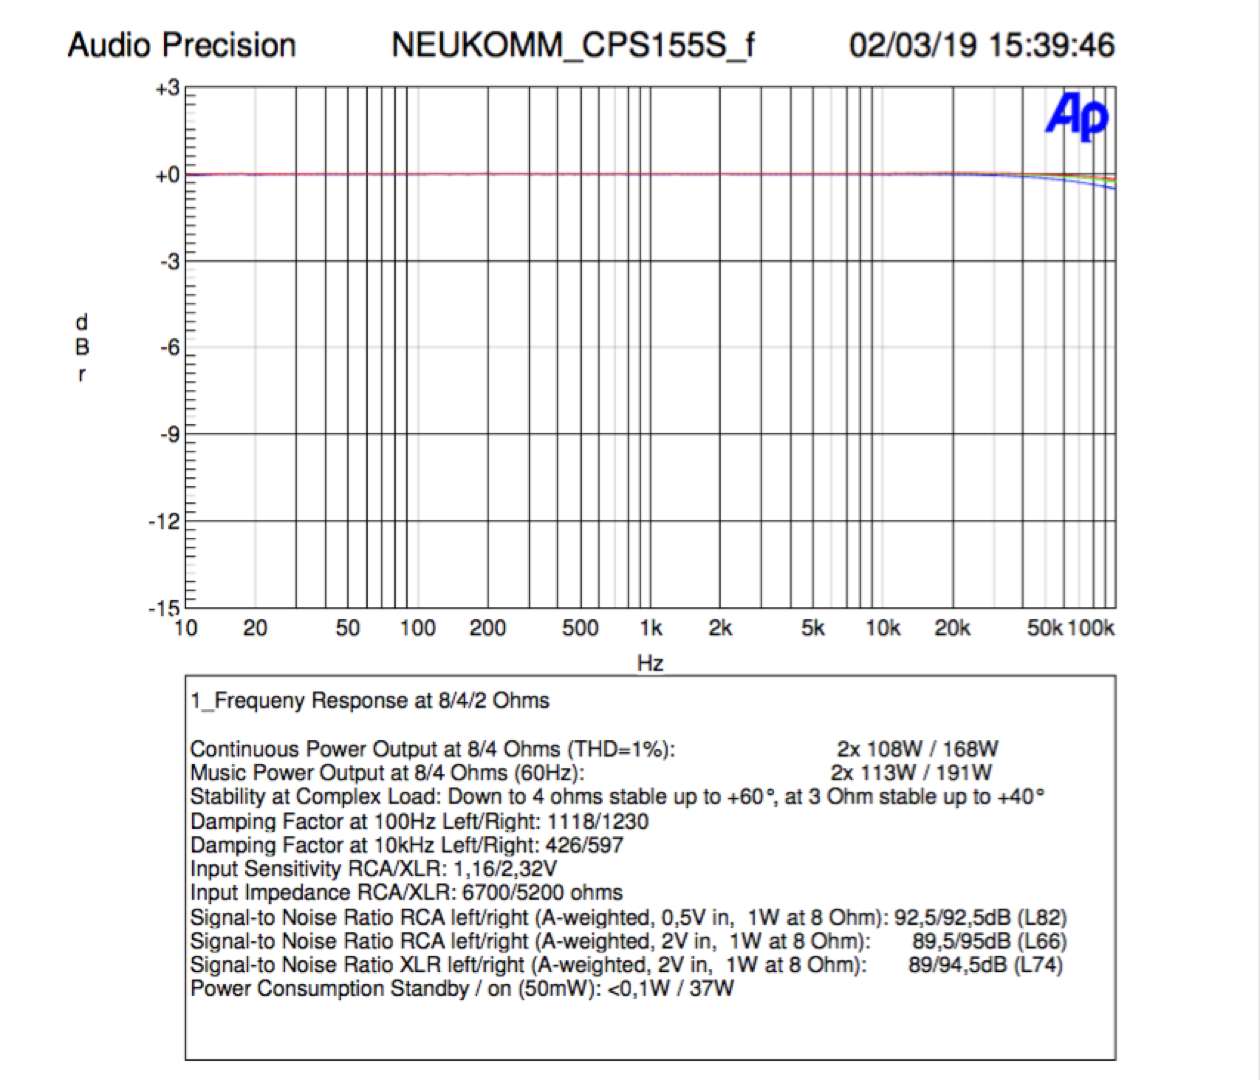 Neukomm CPA155S Technical Spedifications and Frequency Response with Load